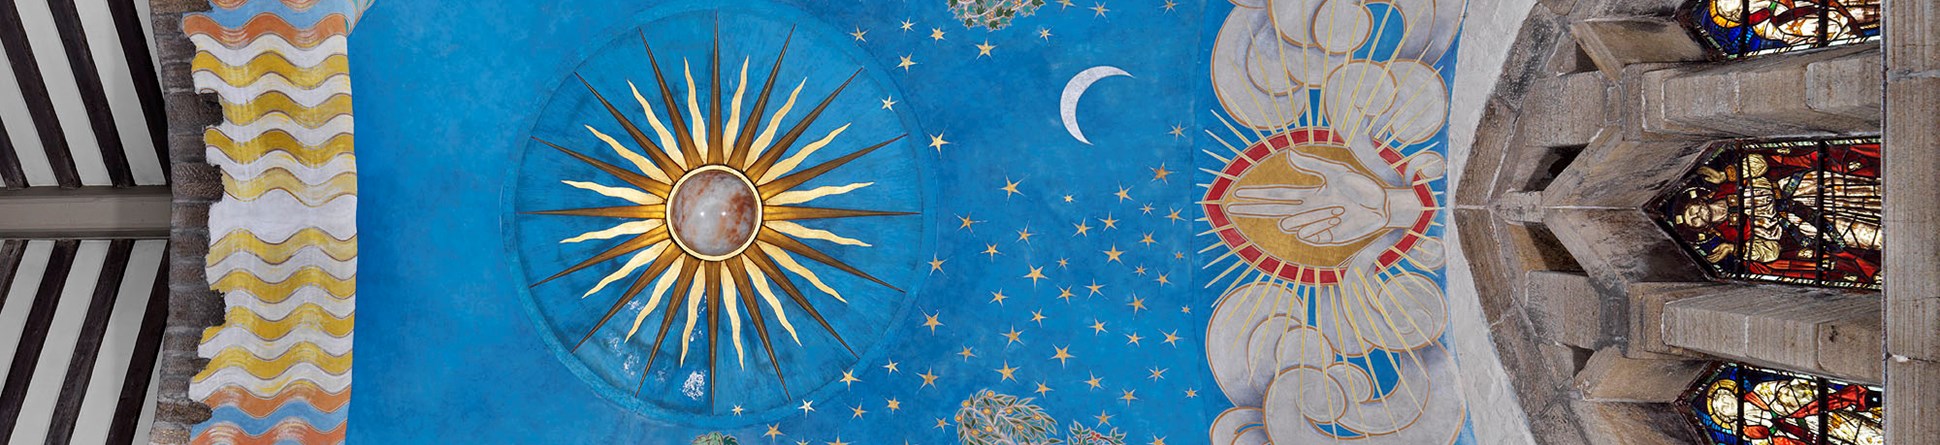 Church ceiling mural featuring sun, moon, stars, trees and a hand flanked by clouds, all against a bright blue background.